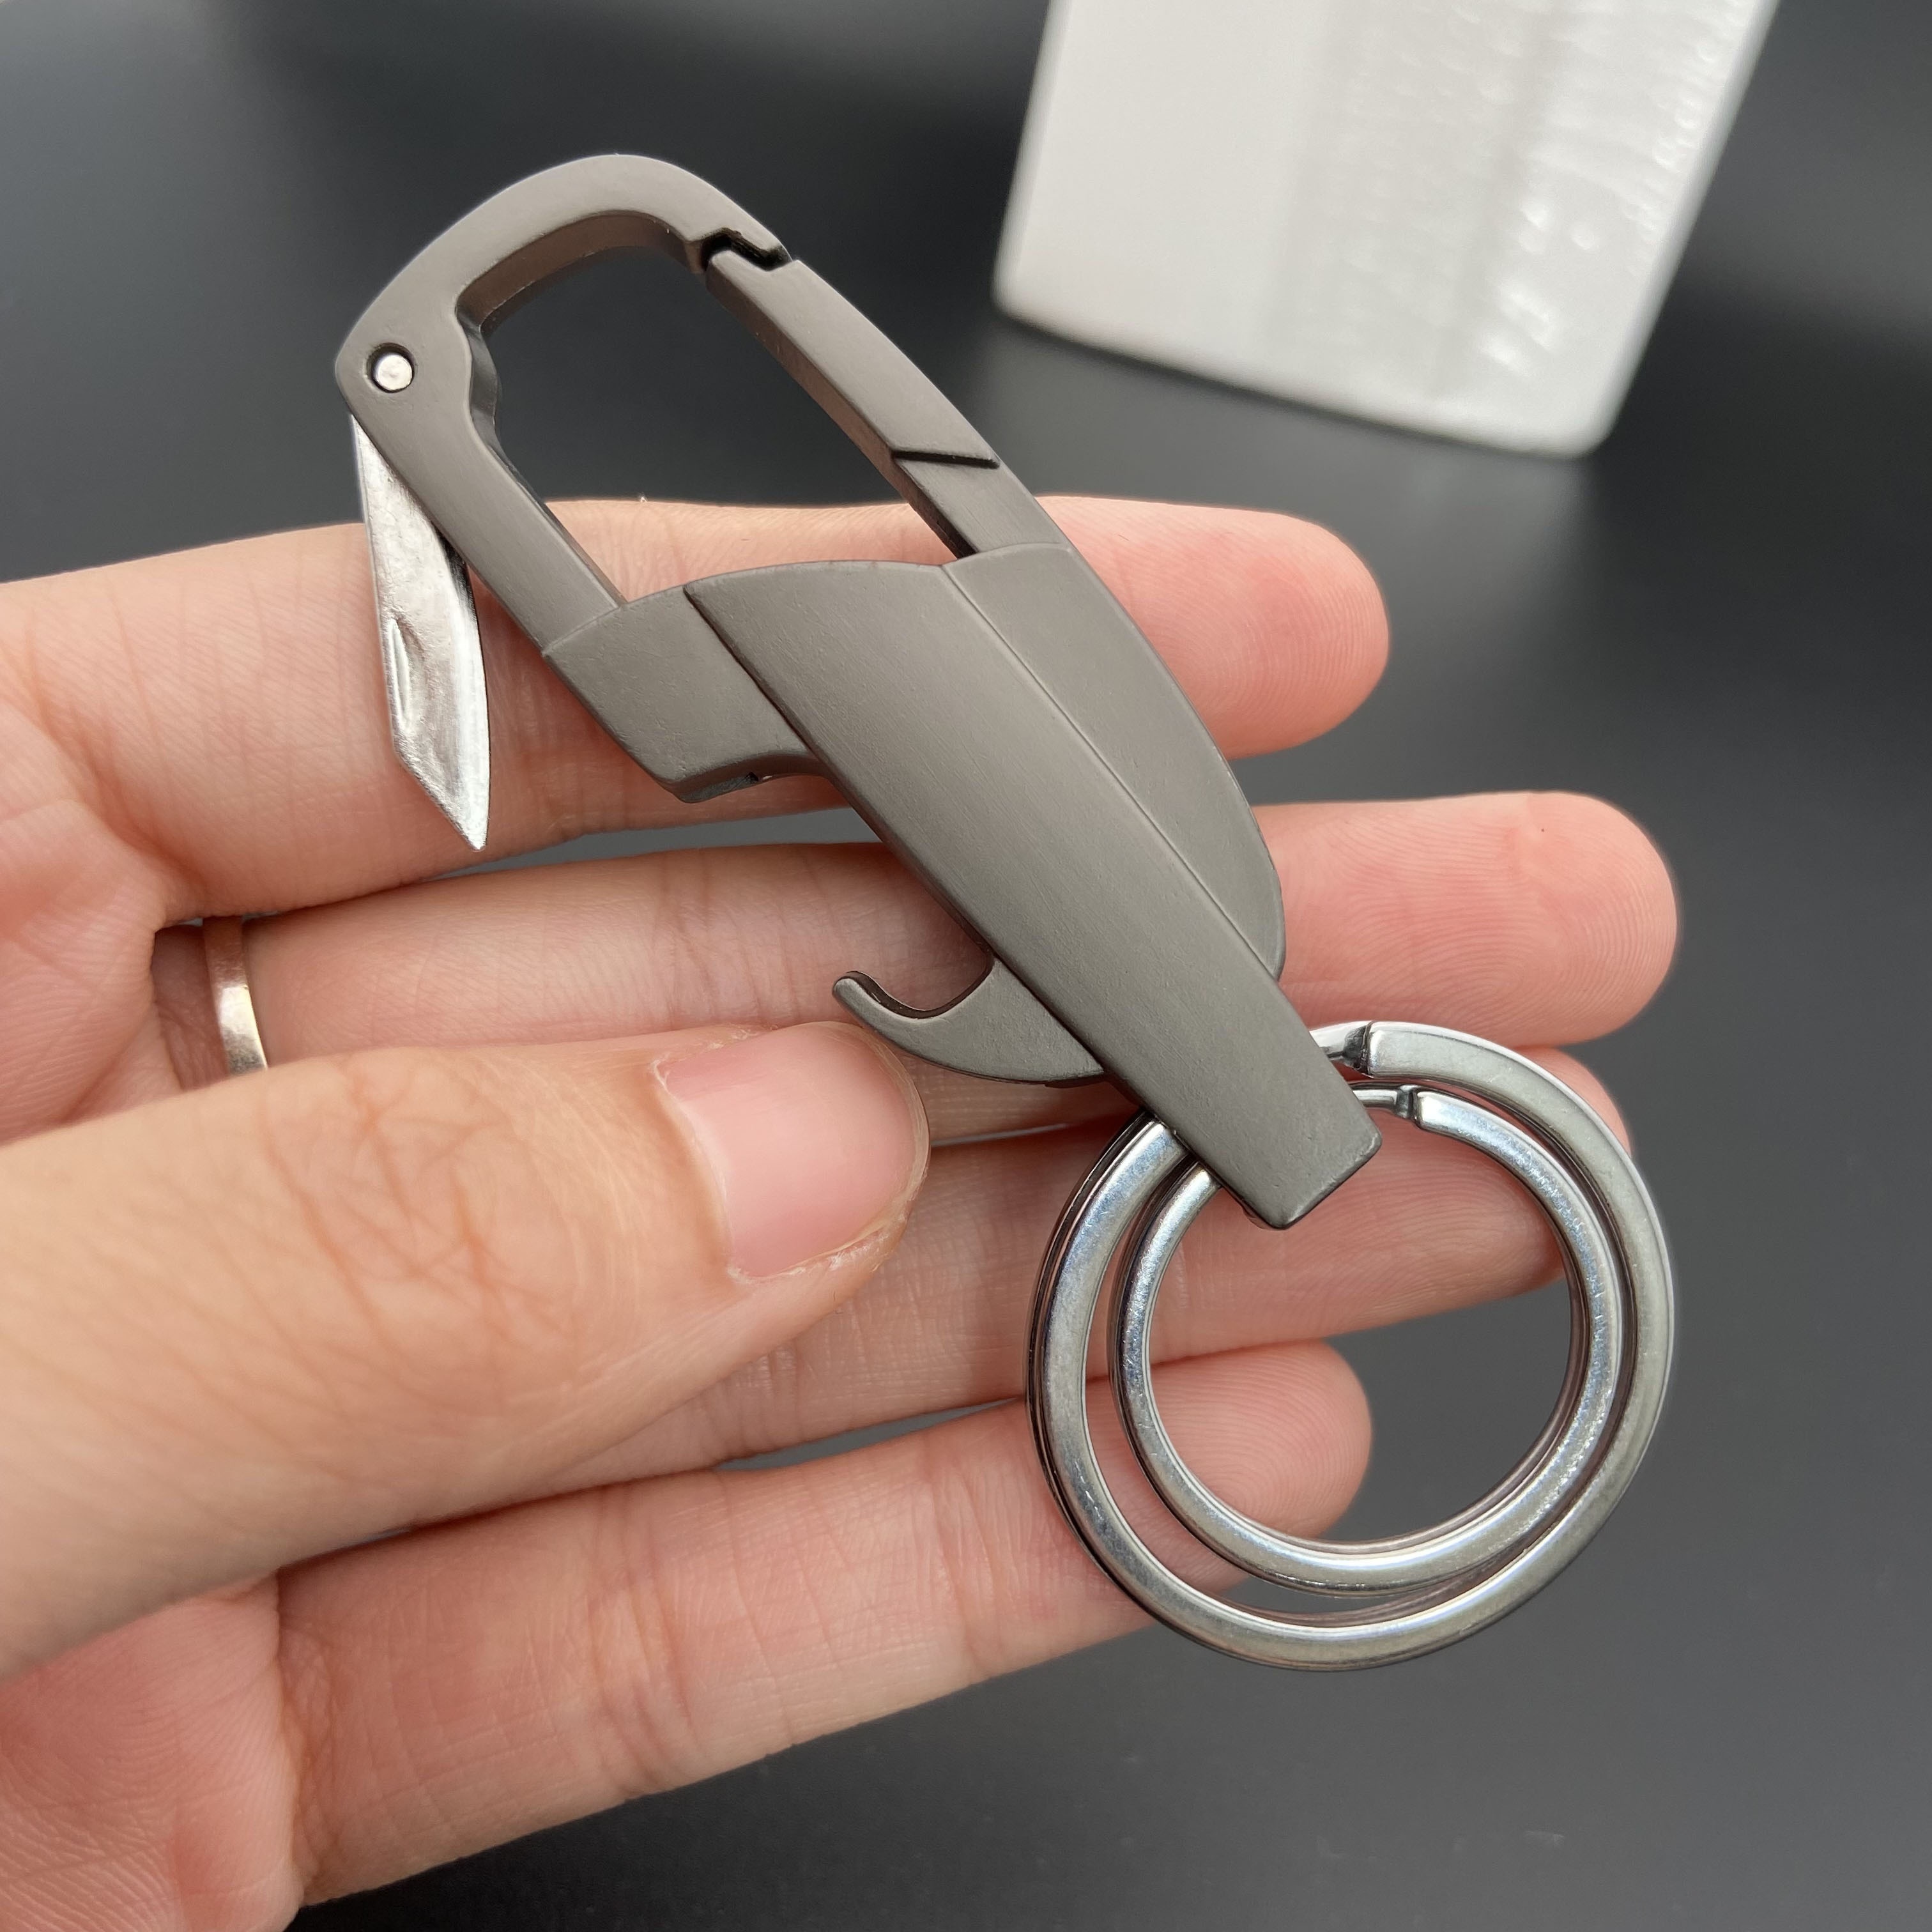 Dropship 3 In 1 Fidget Spinner Keychain With Pocket Knife Keychain Pendant  Beer Bottle Opener to Sell Online at a Lower Price